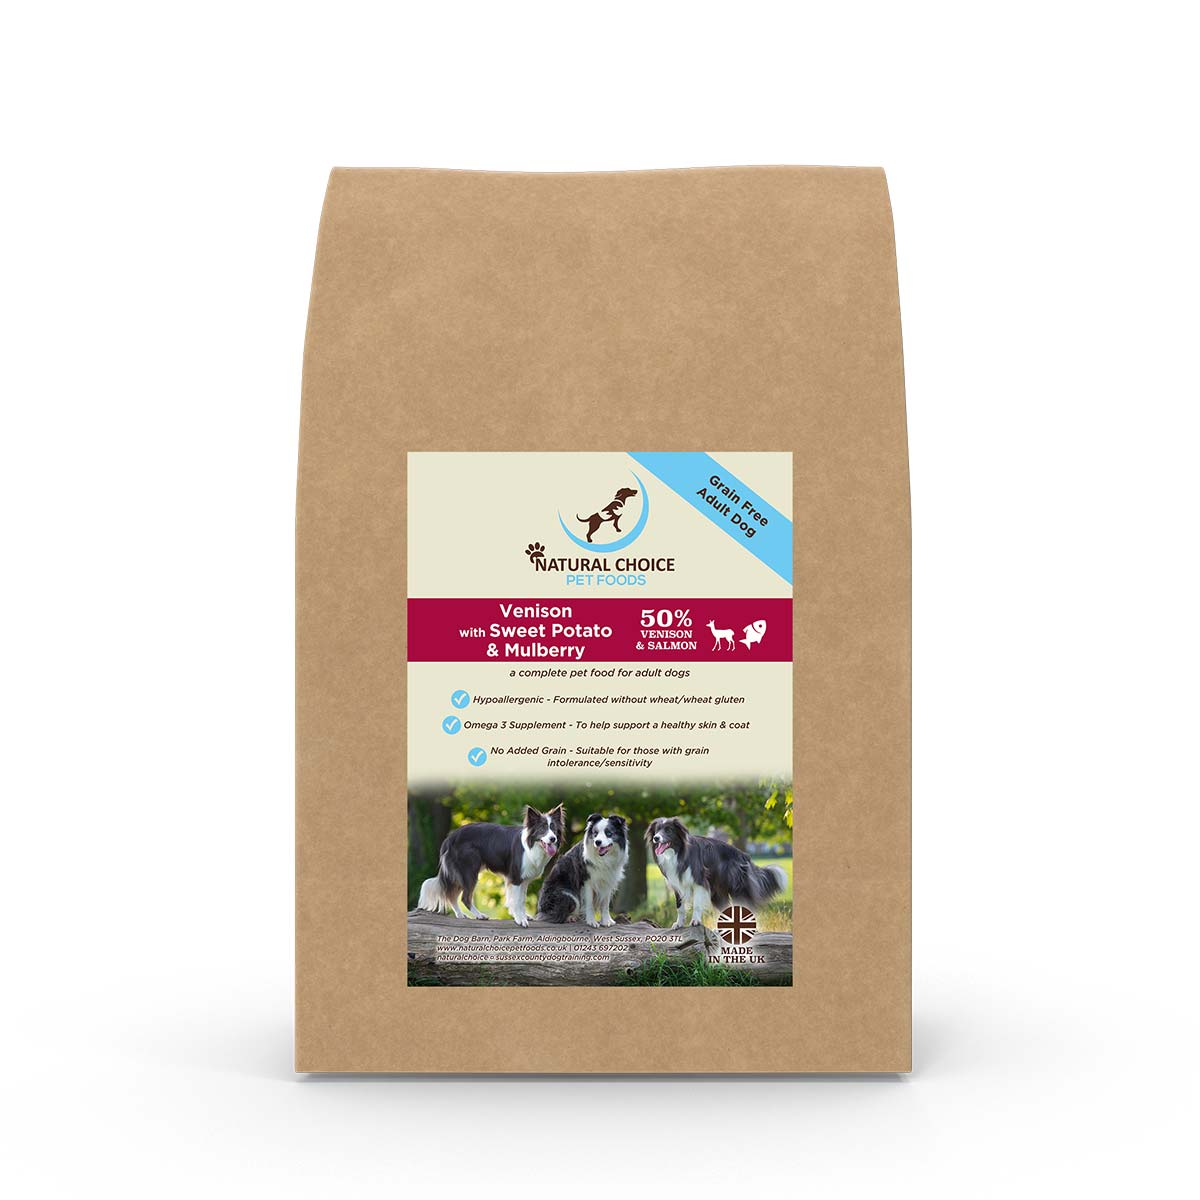 Natural Choice Pet Foods - Venison, Sweet Potato & Mulberry - Grain Free Adult Dry Dog Food